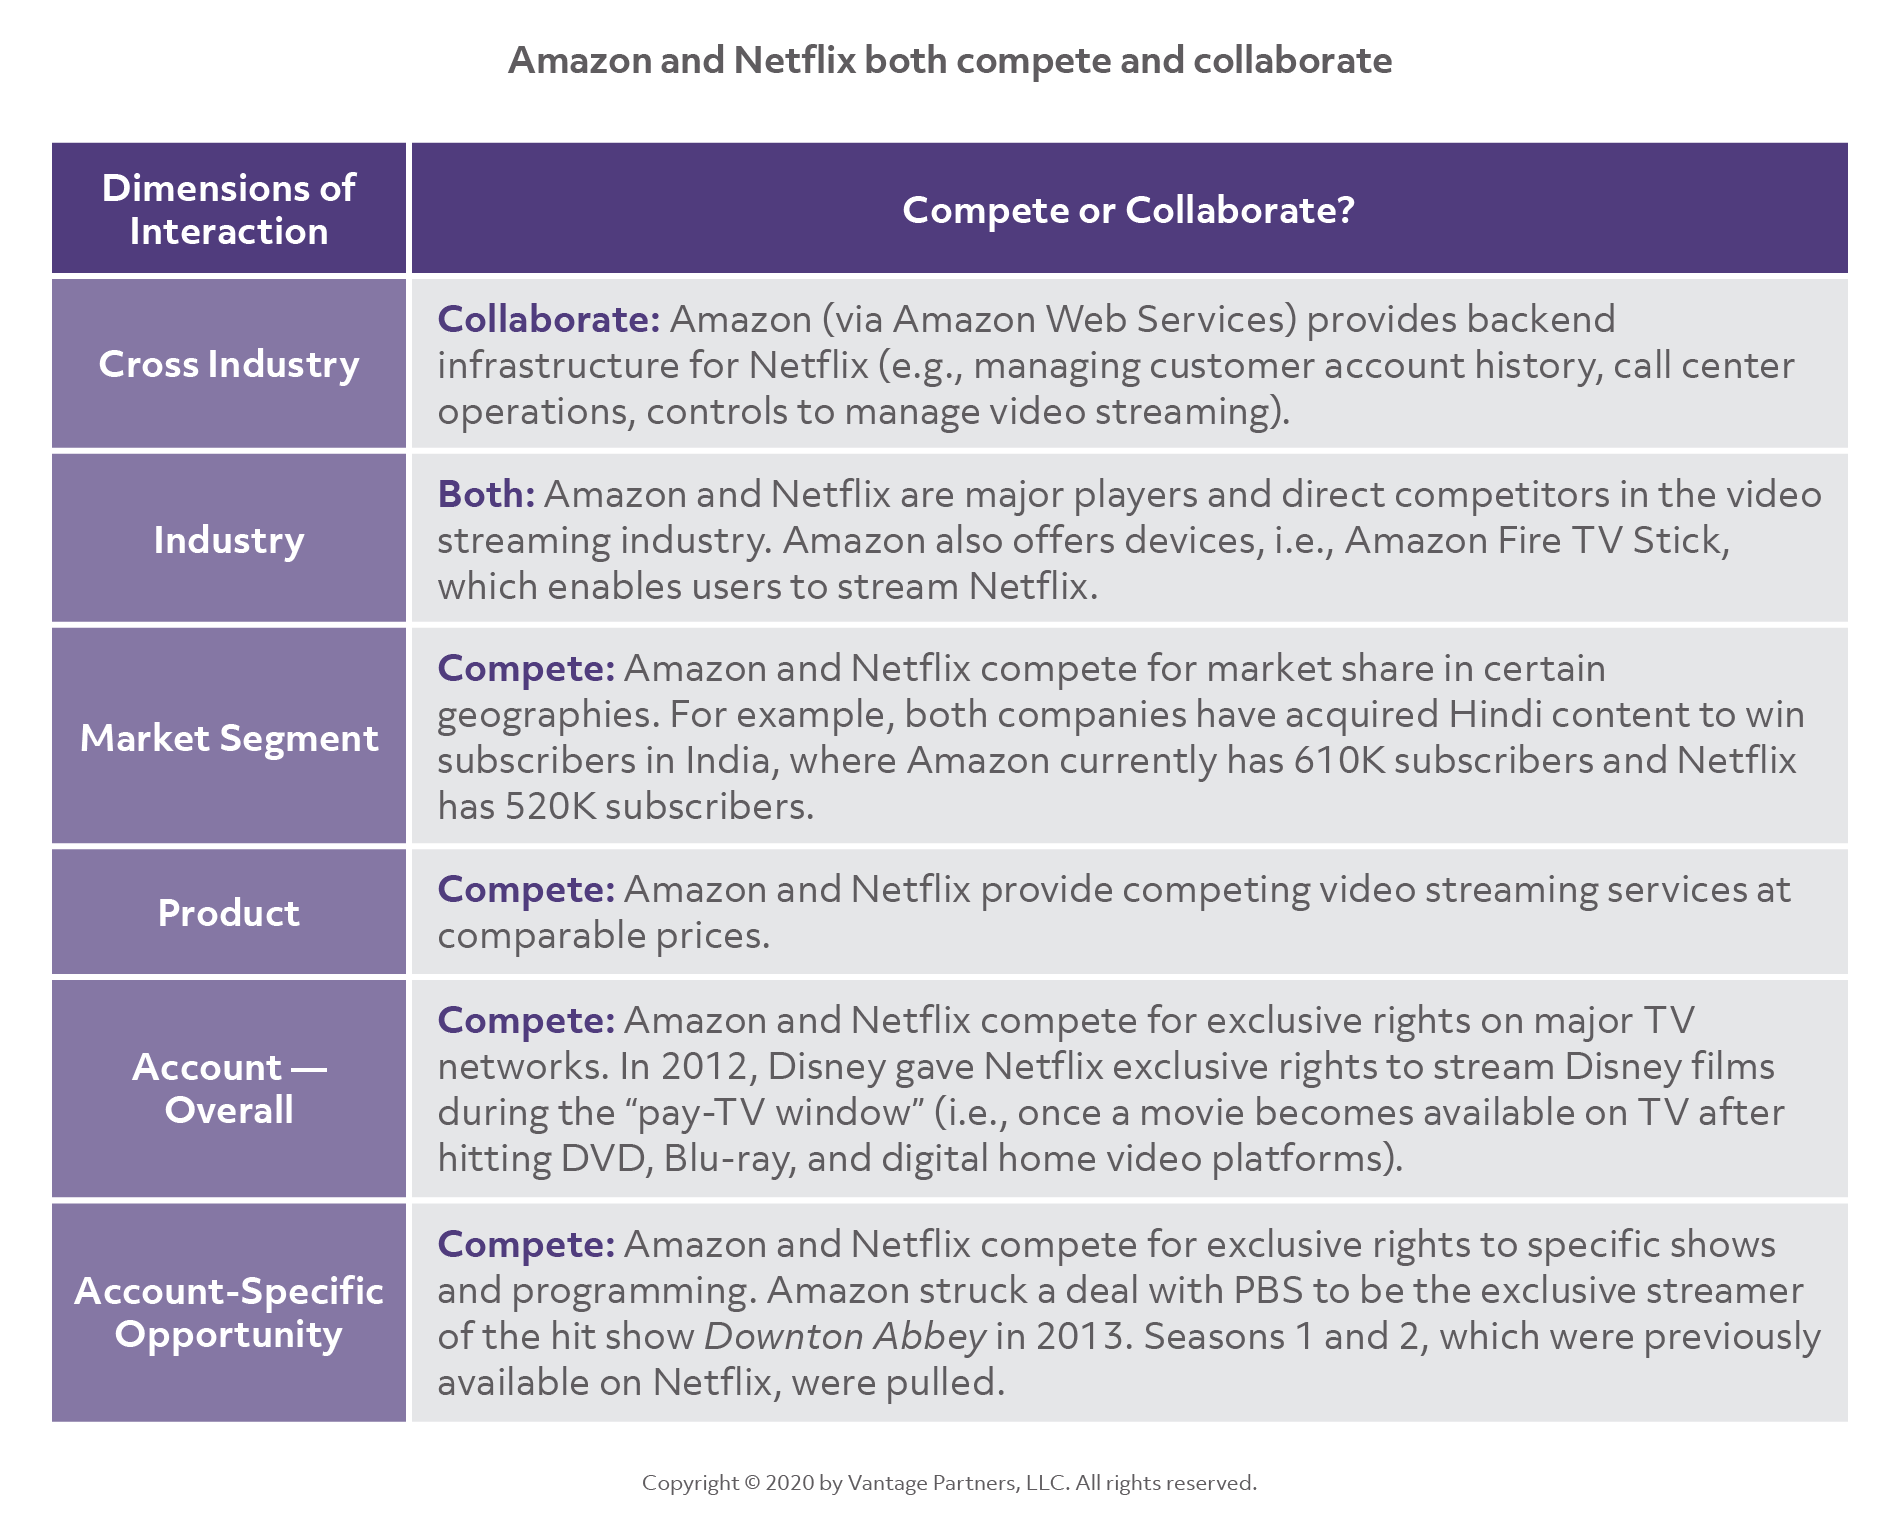 Amazon and Netflix both compete and collab_2X